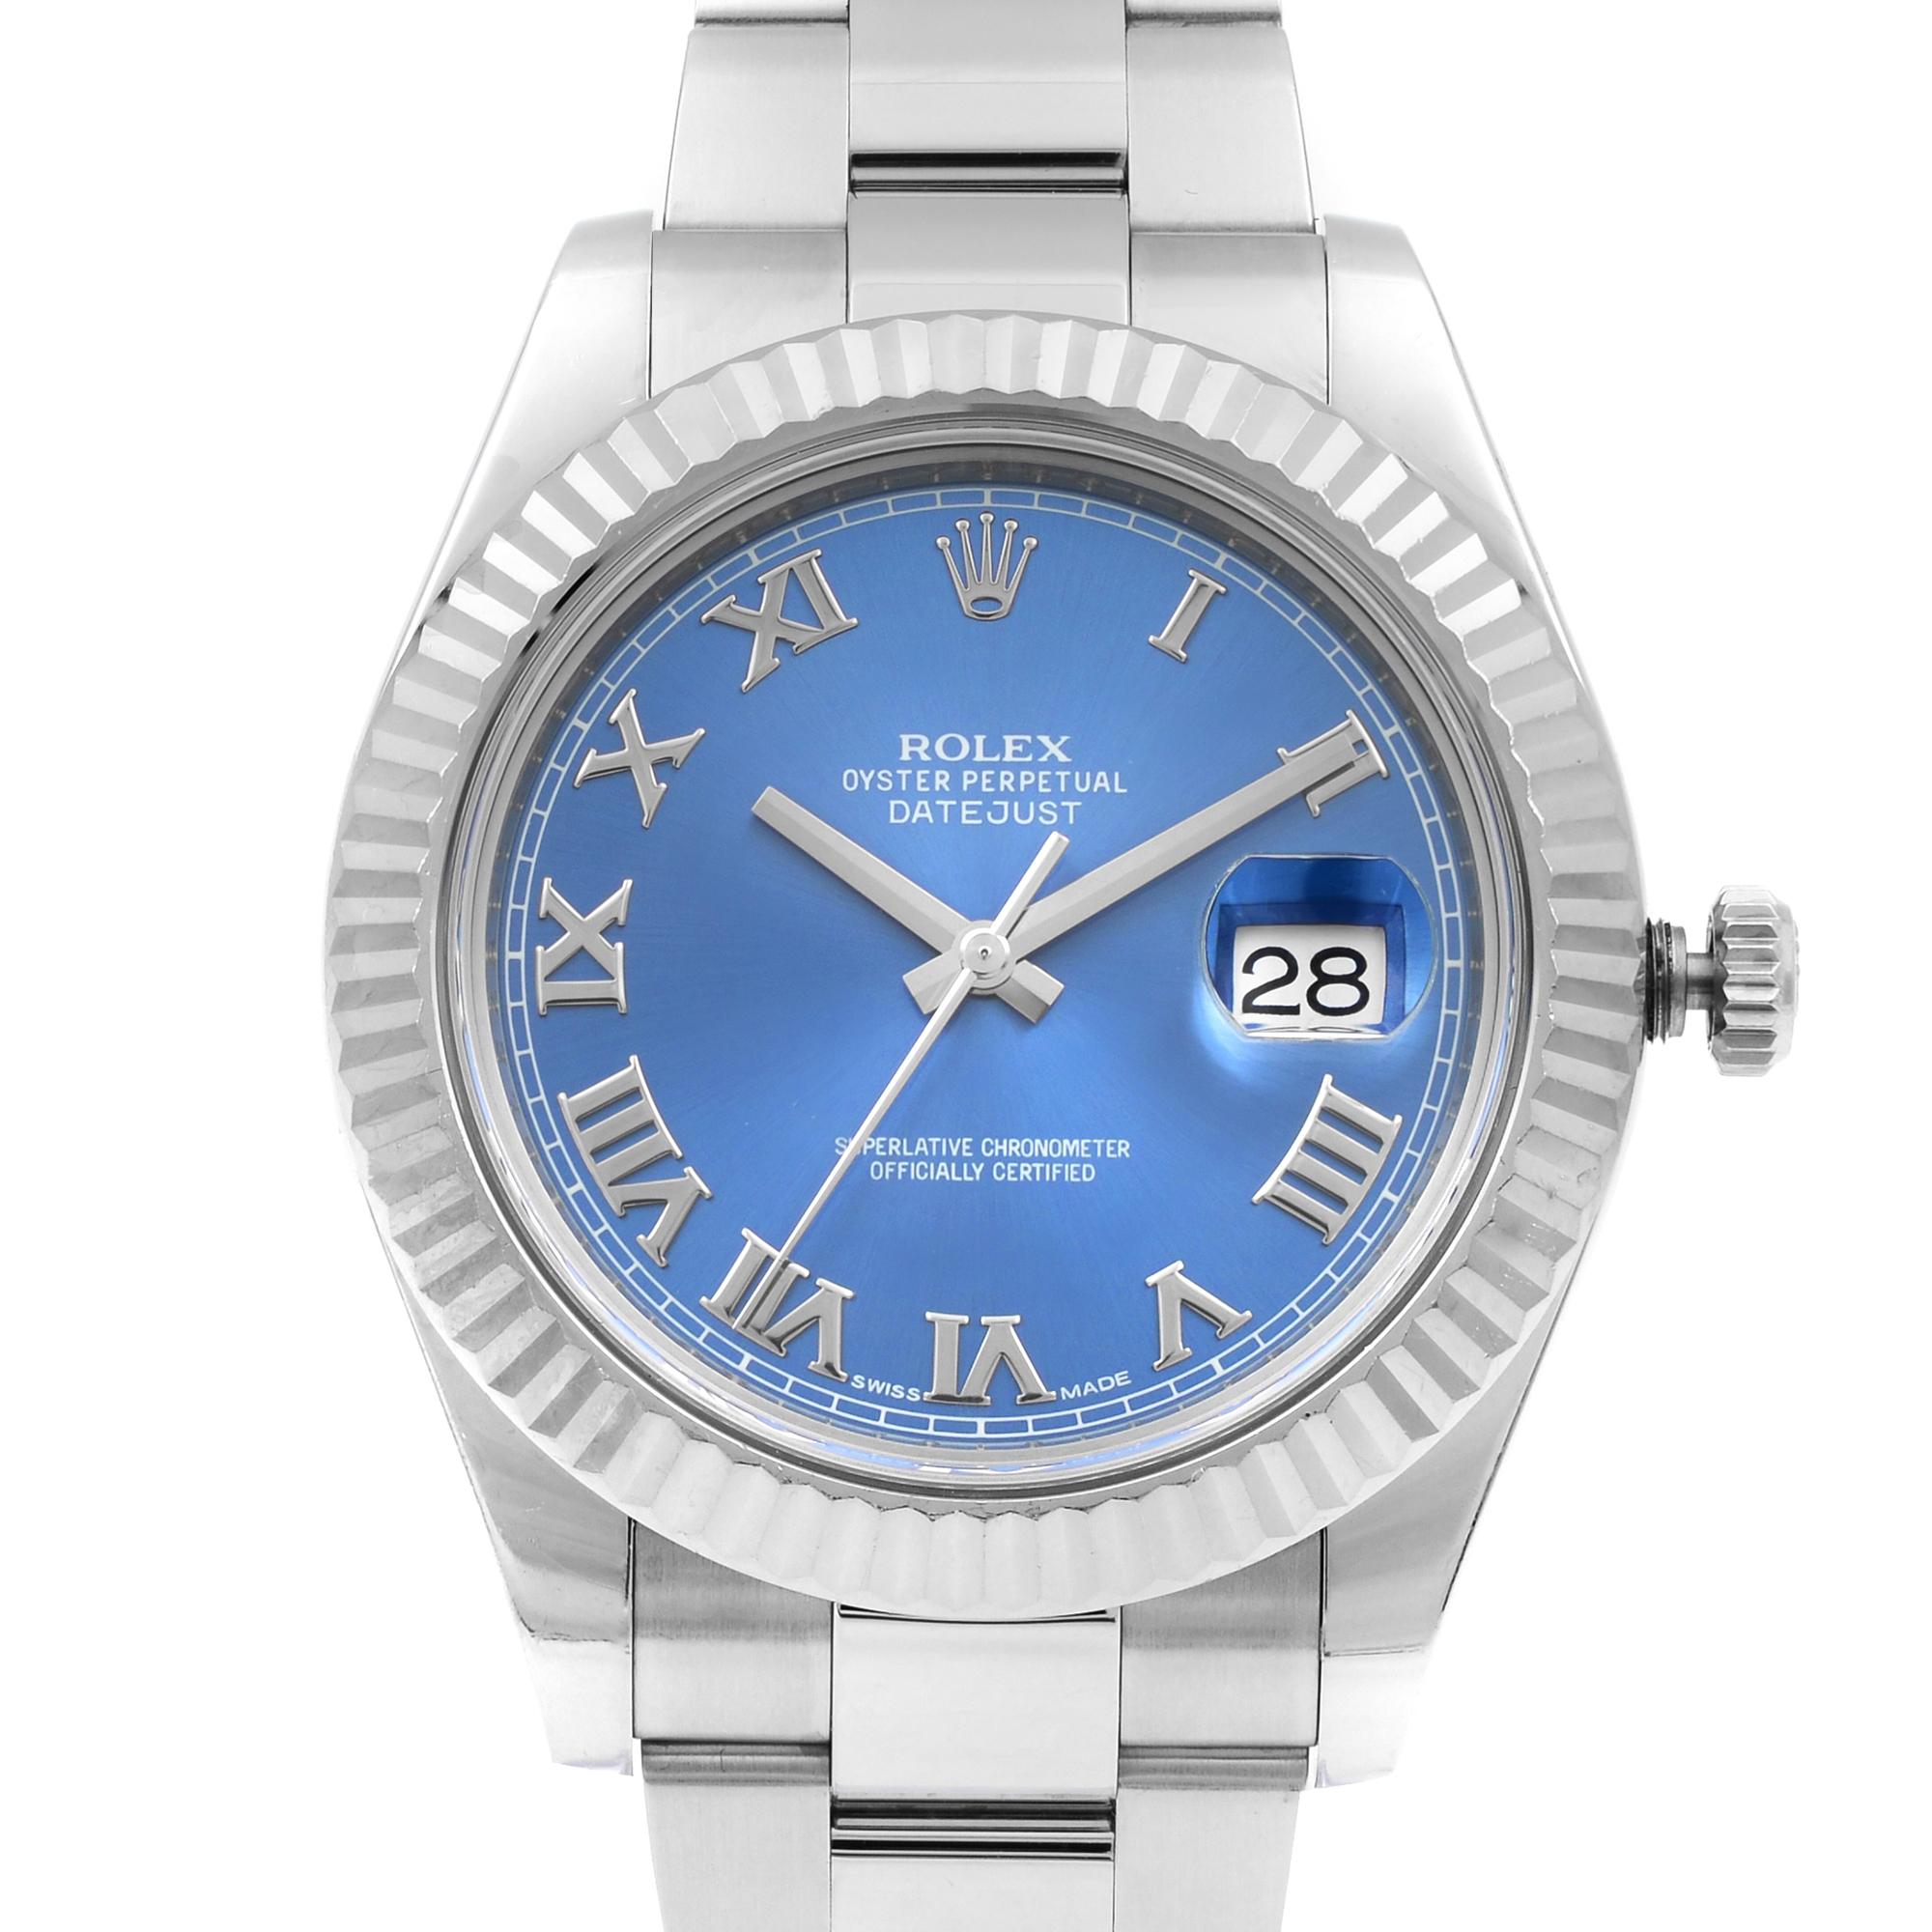 This pre-owned Rolex Datejust II 116334  is a beautiful men's timepiece that is powered by mechanical (automatic) movement which is cased in a stainless steel case. It has a round shape face, date indicator dial and has hand roman numerals style